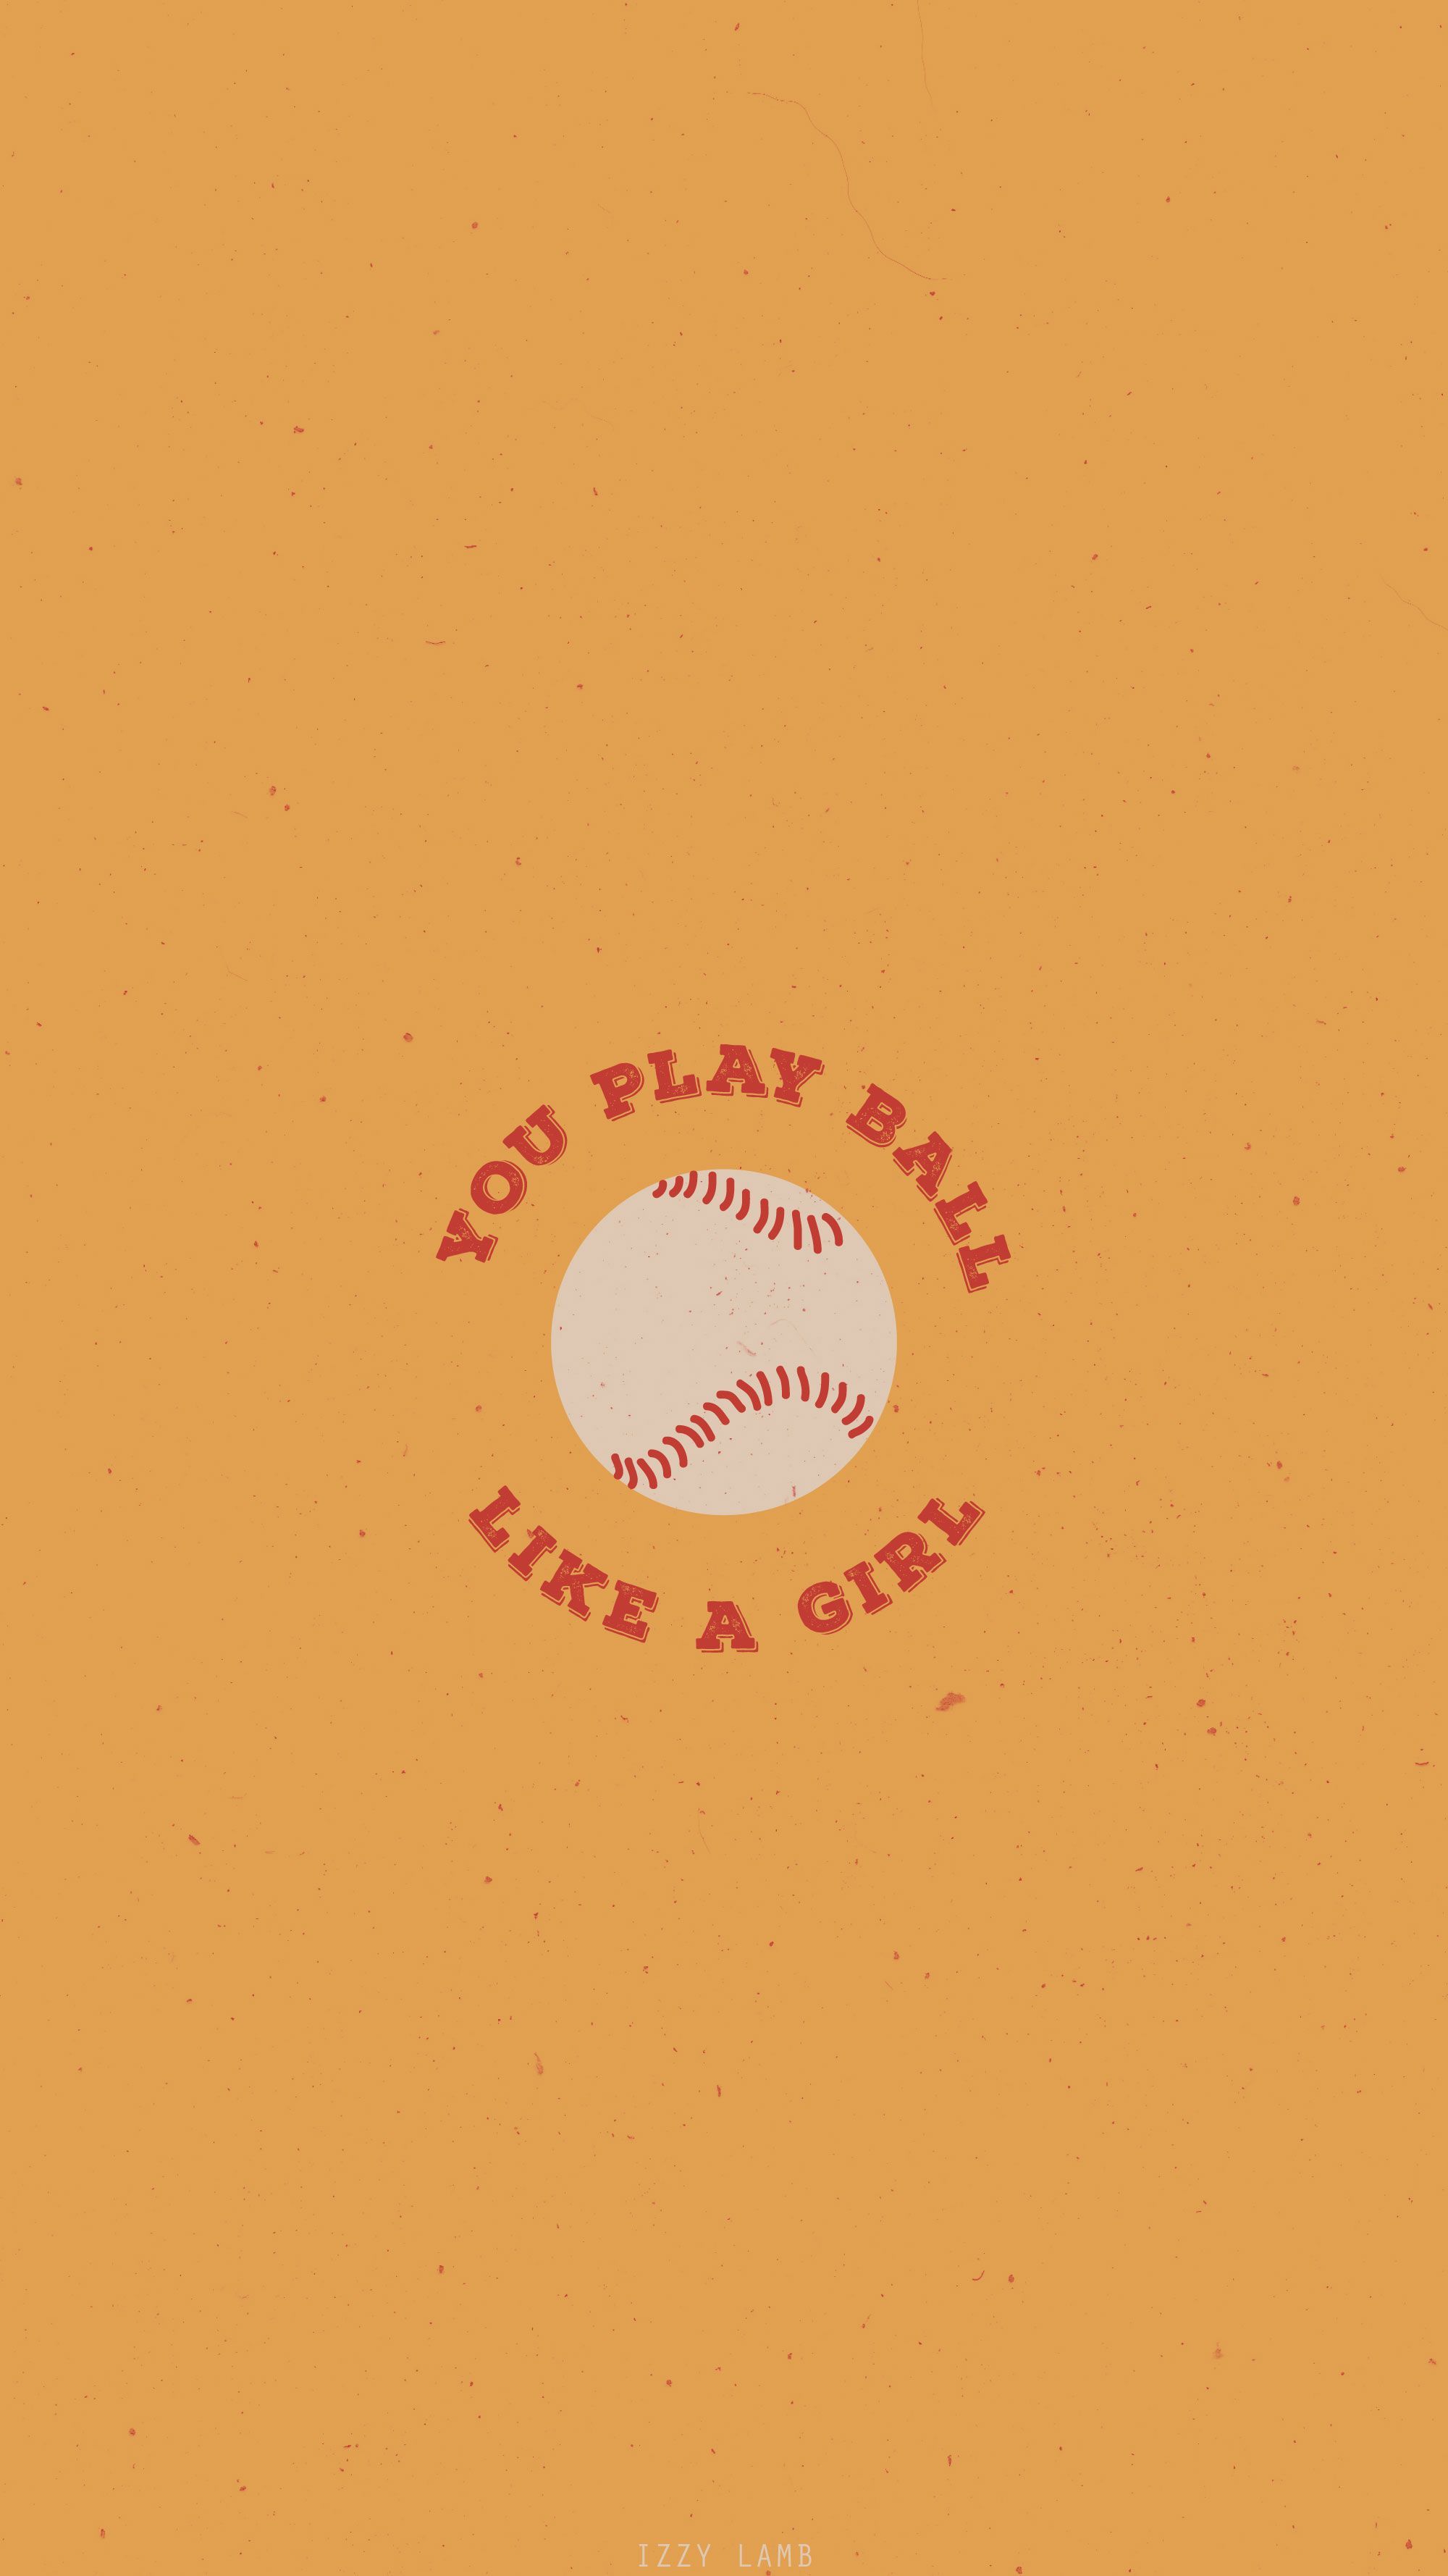 You Play Ball like A Girl Sandlot. iPhone wallpaper quotes funny, Wallpaper iphone quotes background, New wallpaper iphone